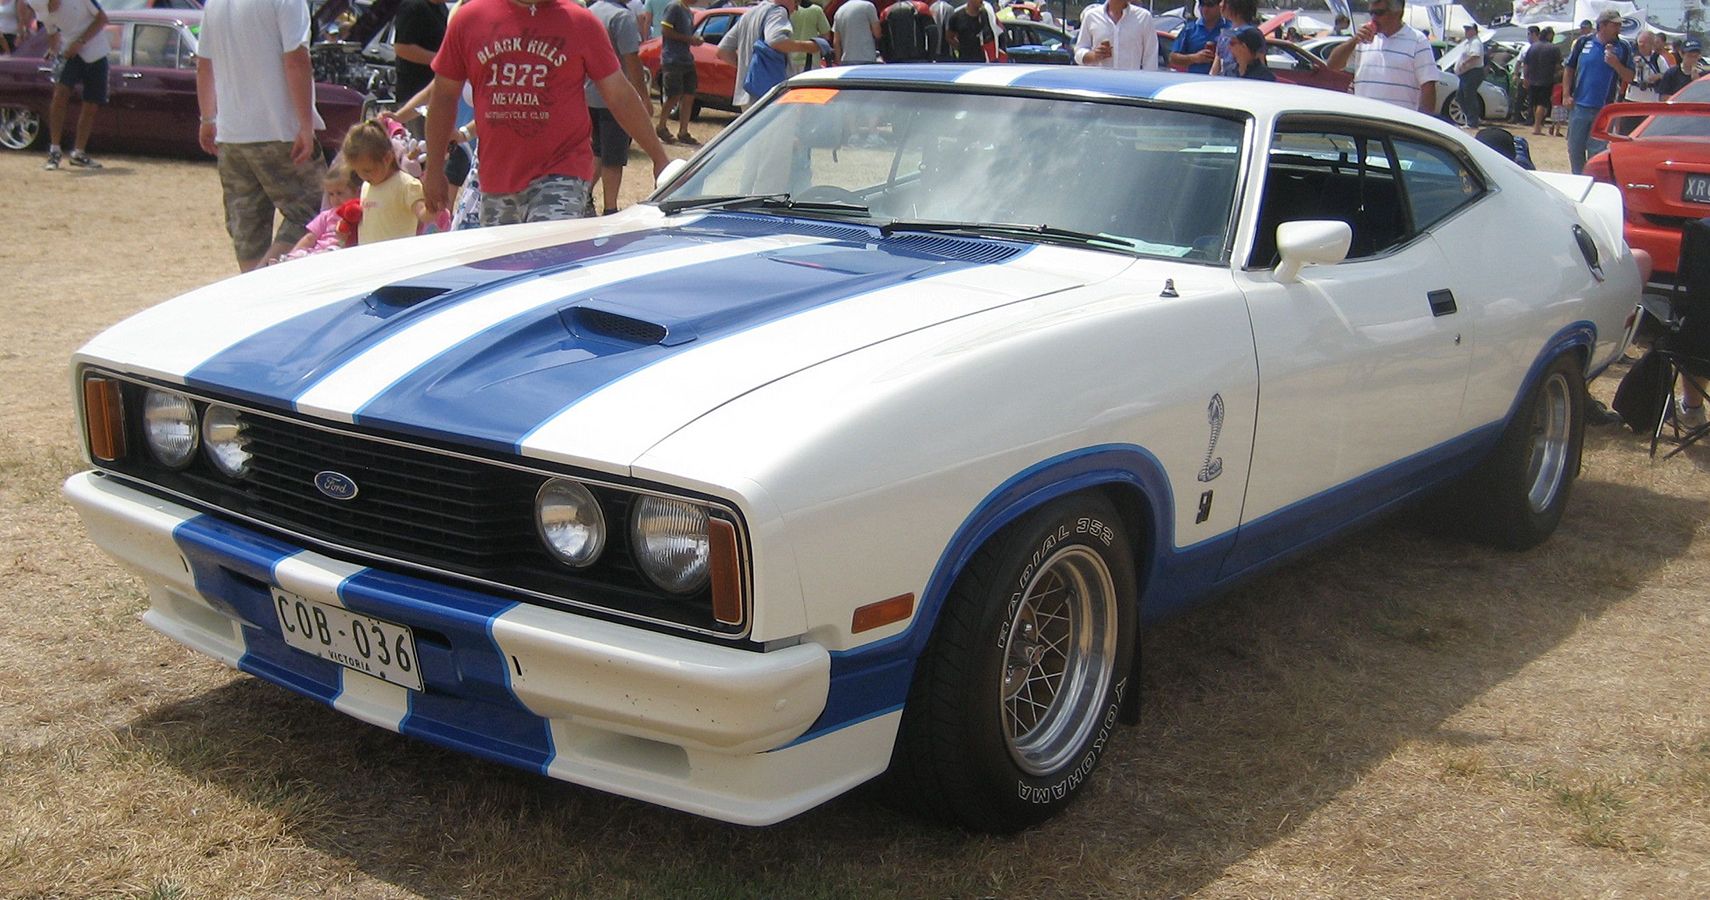 We Badly Want: The Ford Falcon Cobra From Australia